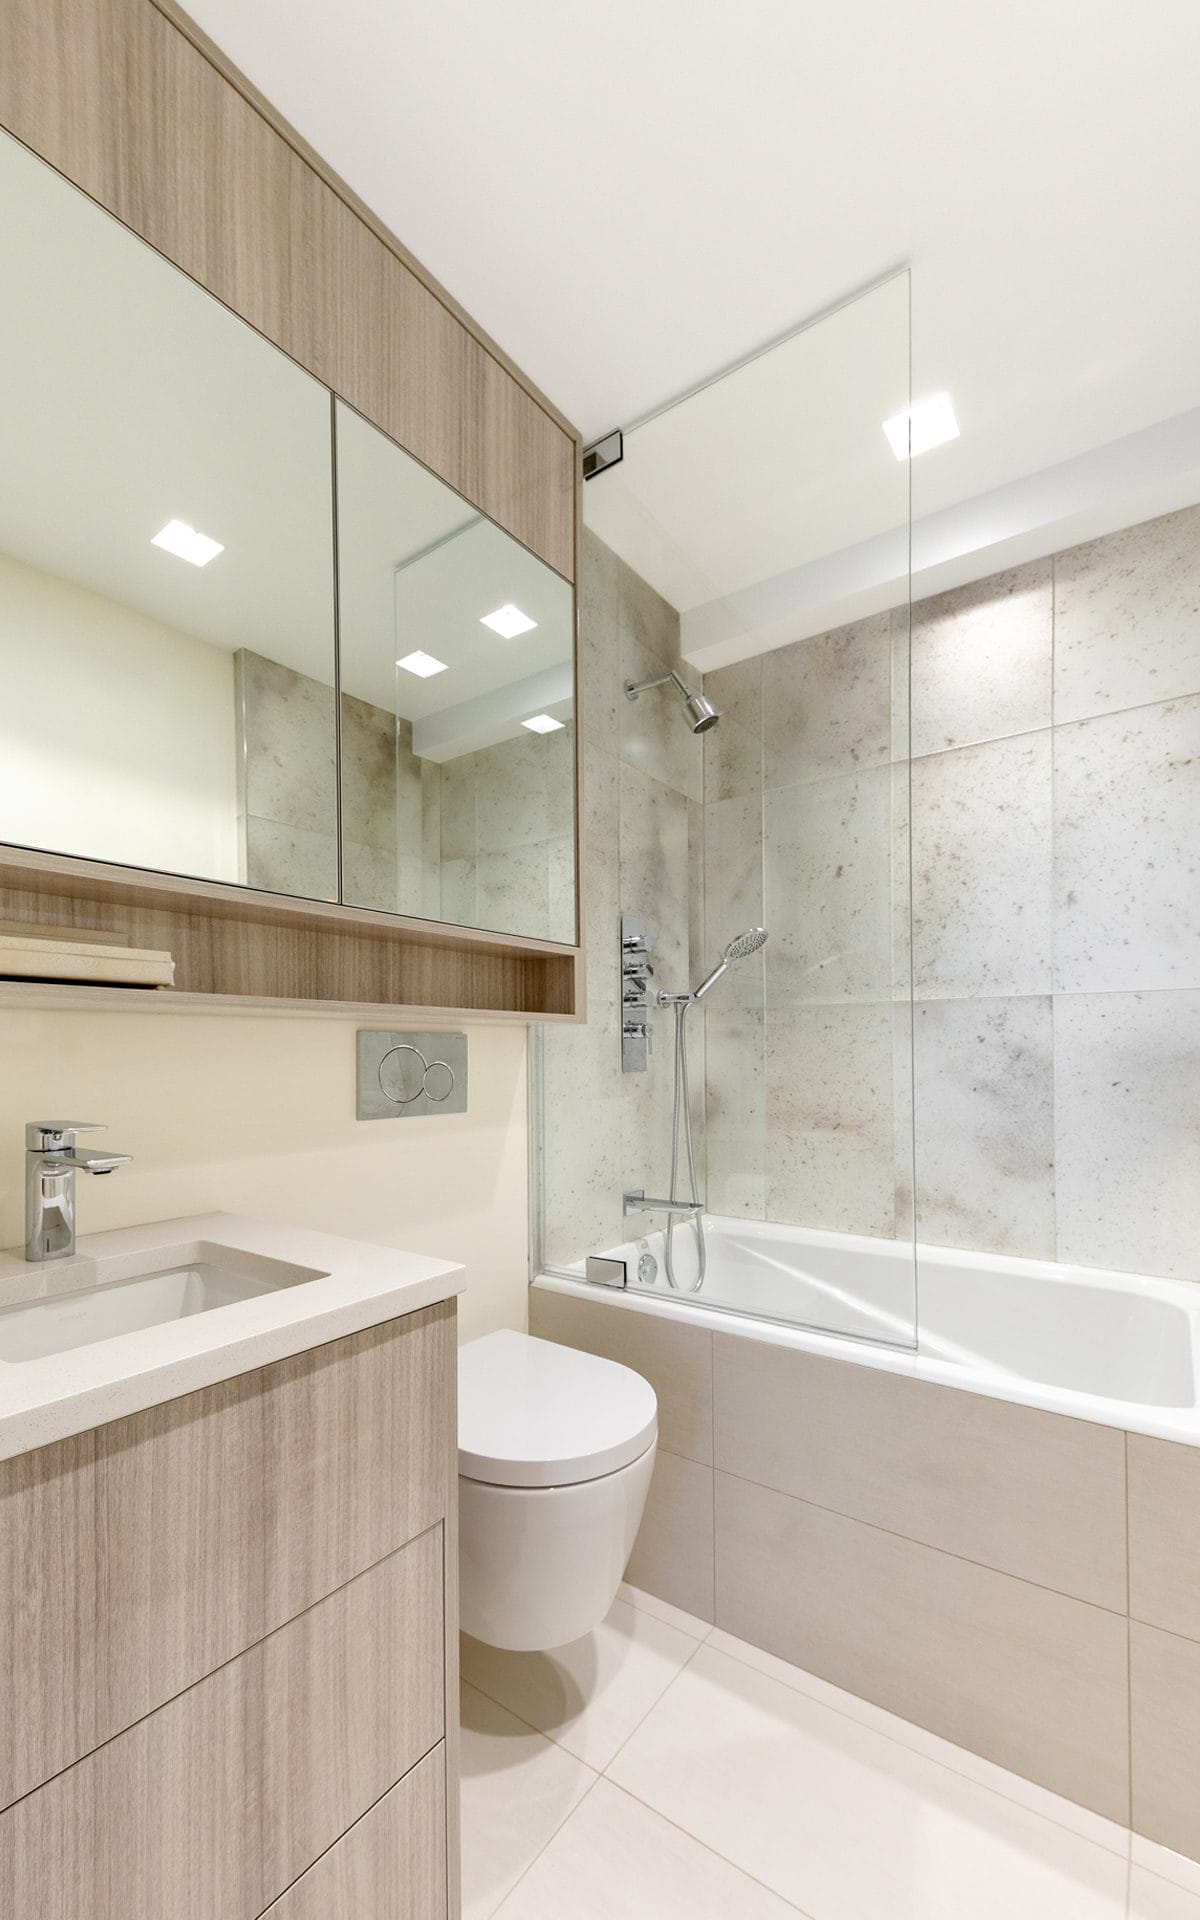 Custom bathroom features Bilotta horizontal-grained cabinetry and modern accessories and fixtures.